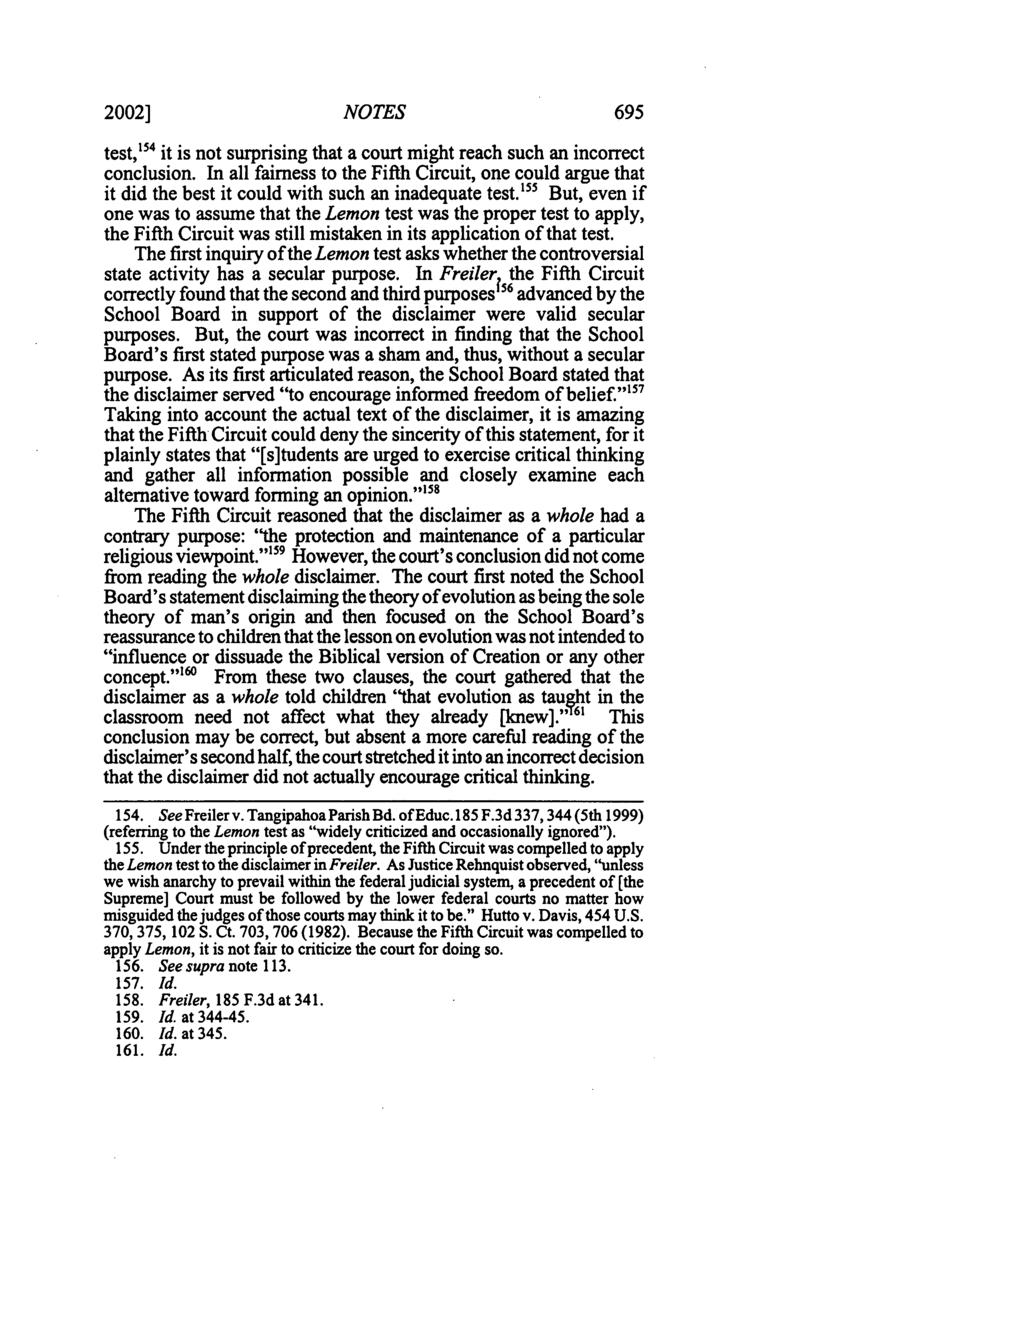 2002] NOTES test, 154 it is not surprising that a court might reach such an incorrect conclusion.